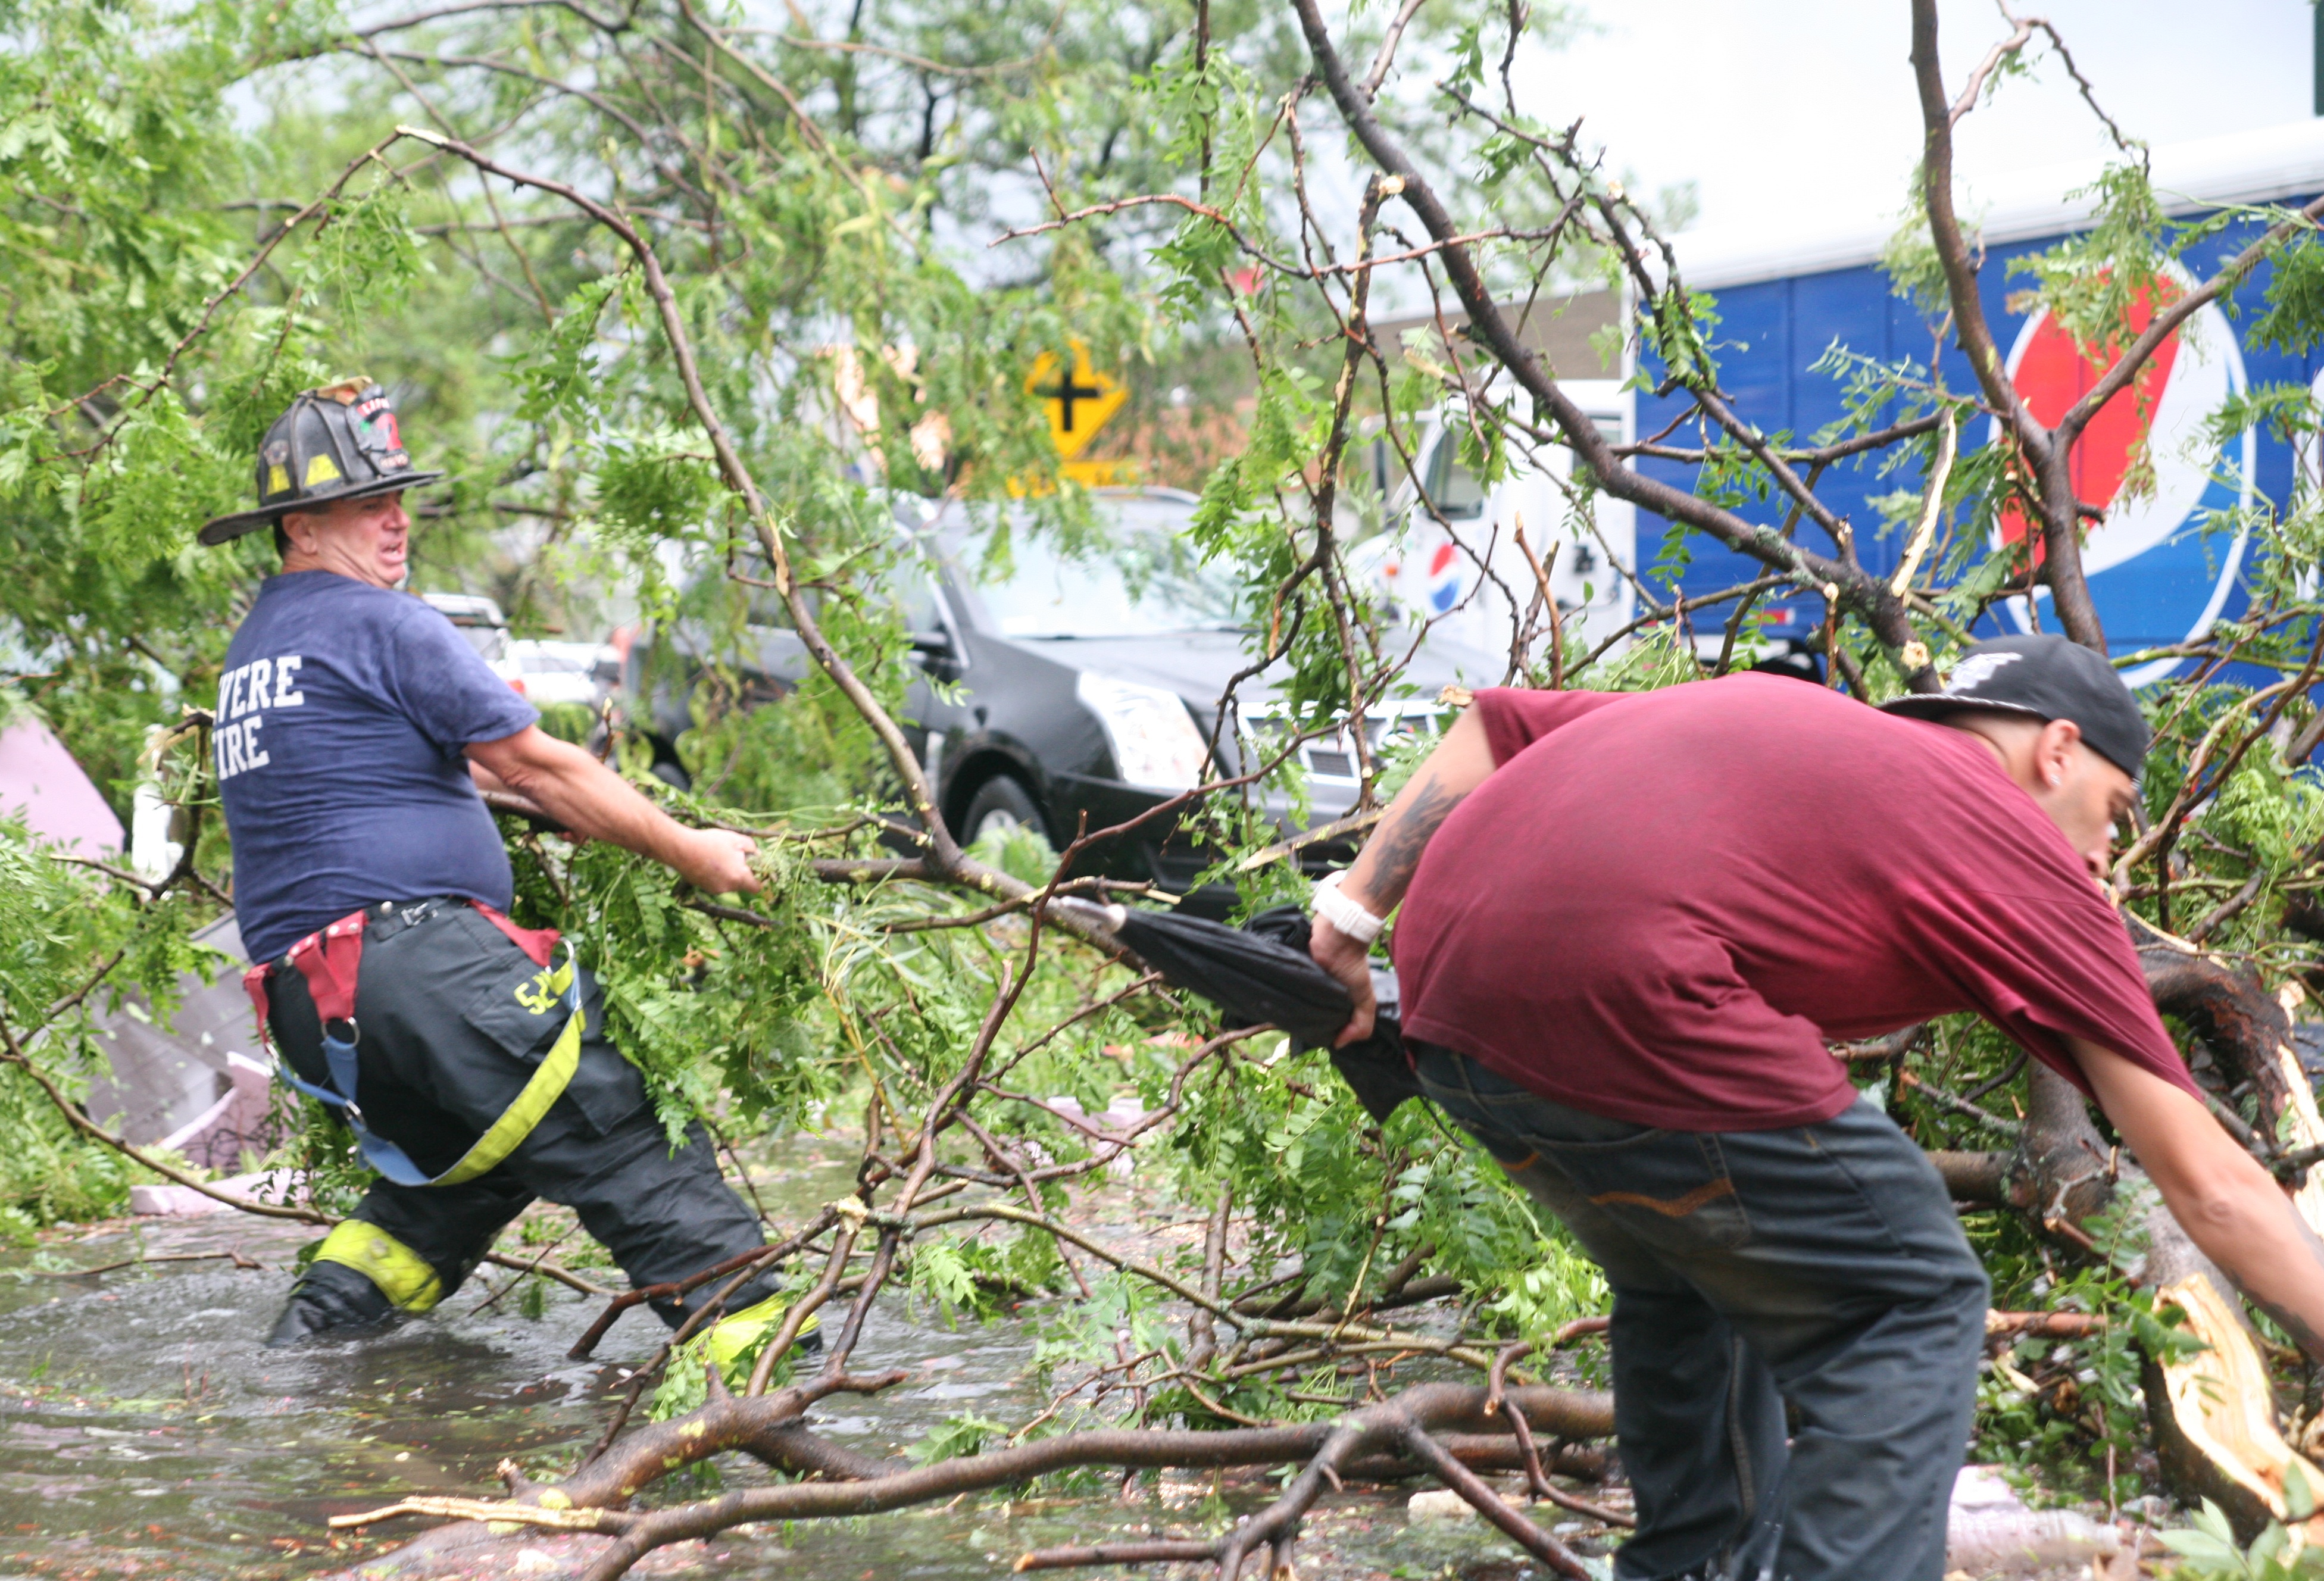 A Revere Firefighter and a passer-by struggled to pull trees off of Broadway about 45 minutes after the hit.